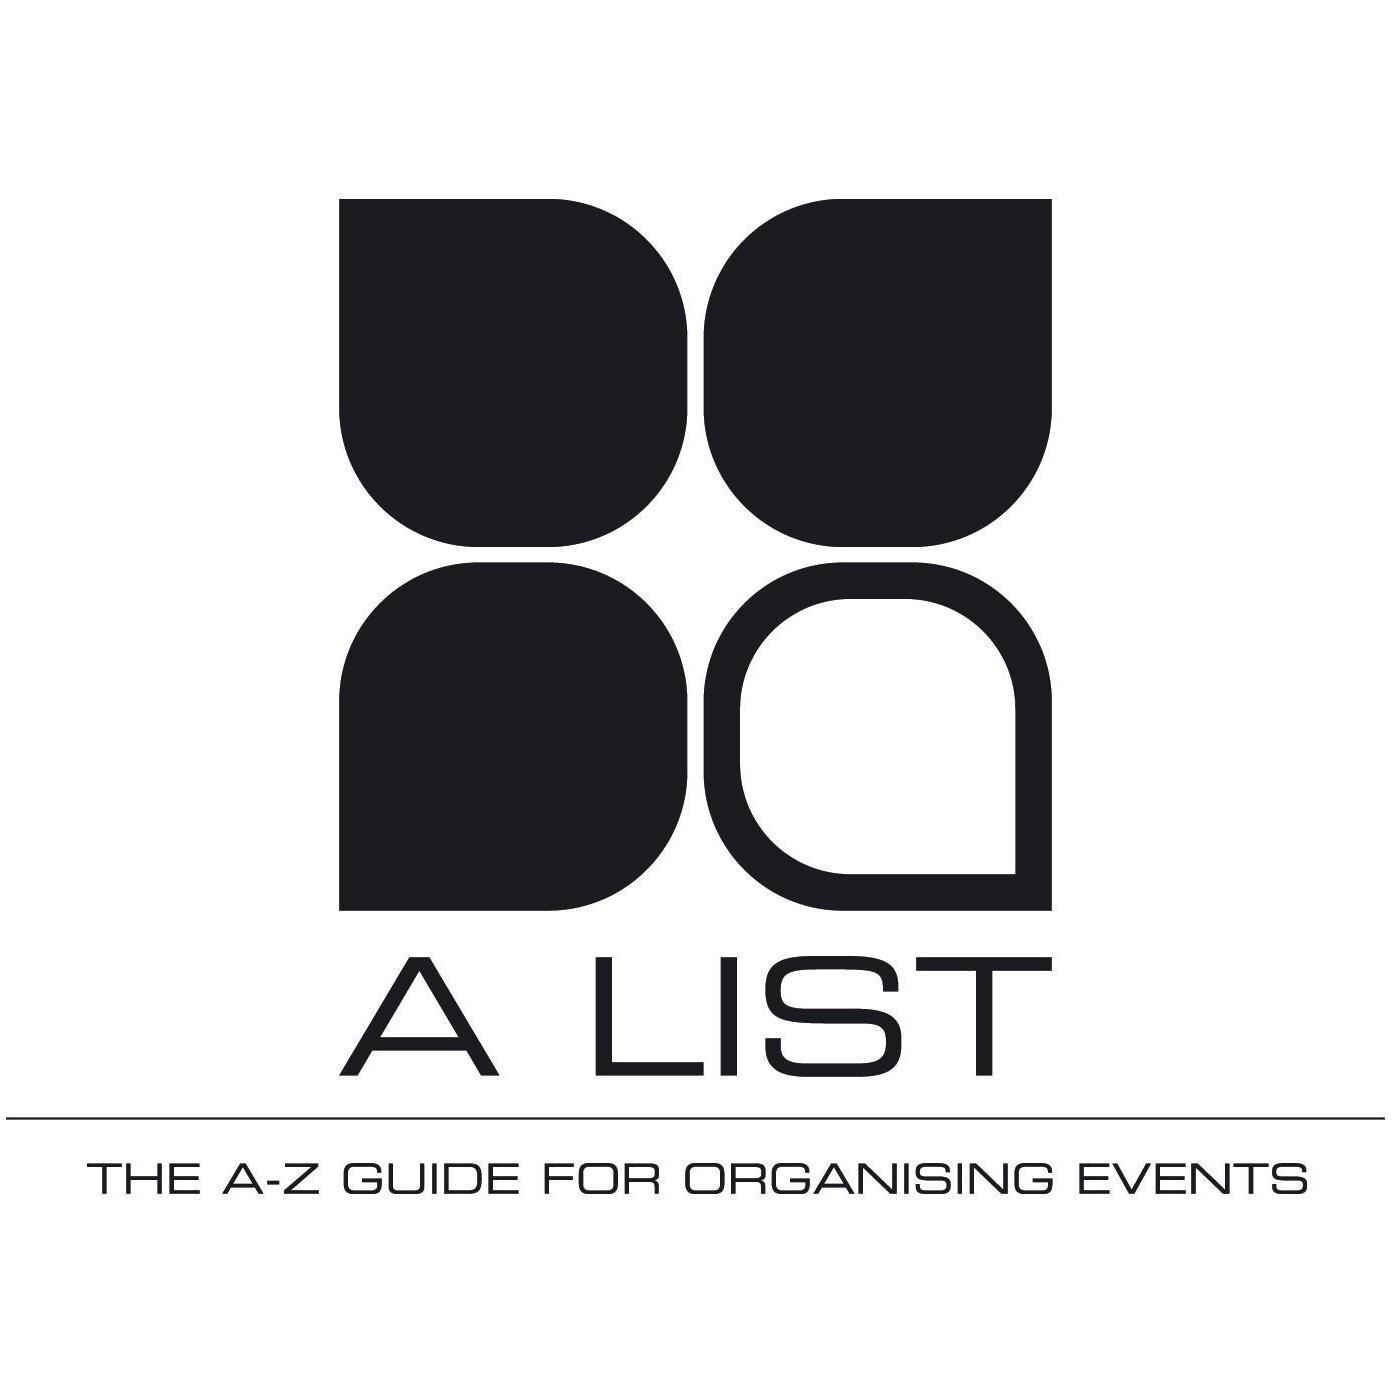 A LIST Guide, a comprehensive guide to the best event venues, suppliers & activities. It’s a fast and reliable tool to help plan your next event or conference.